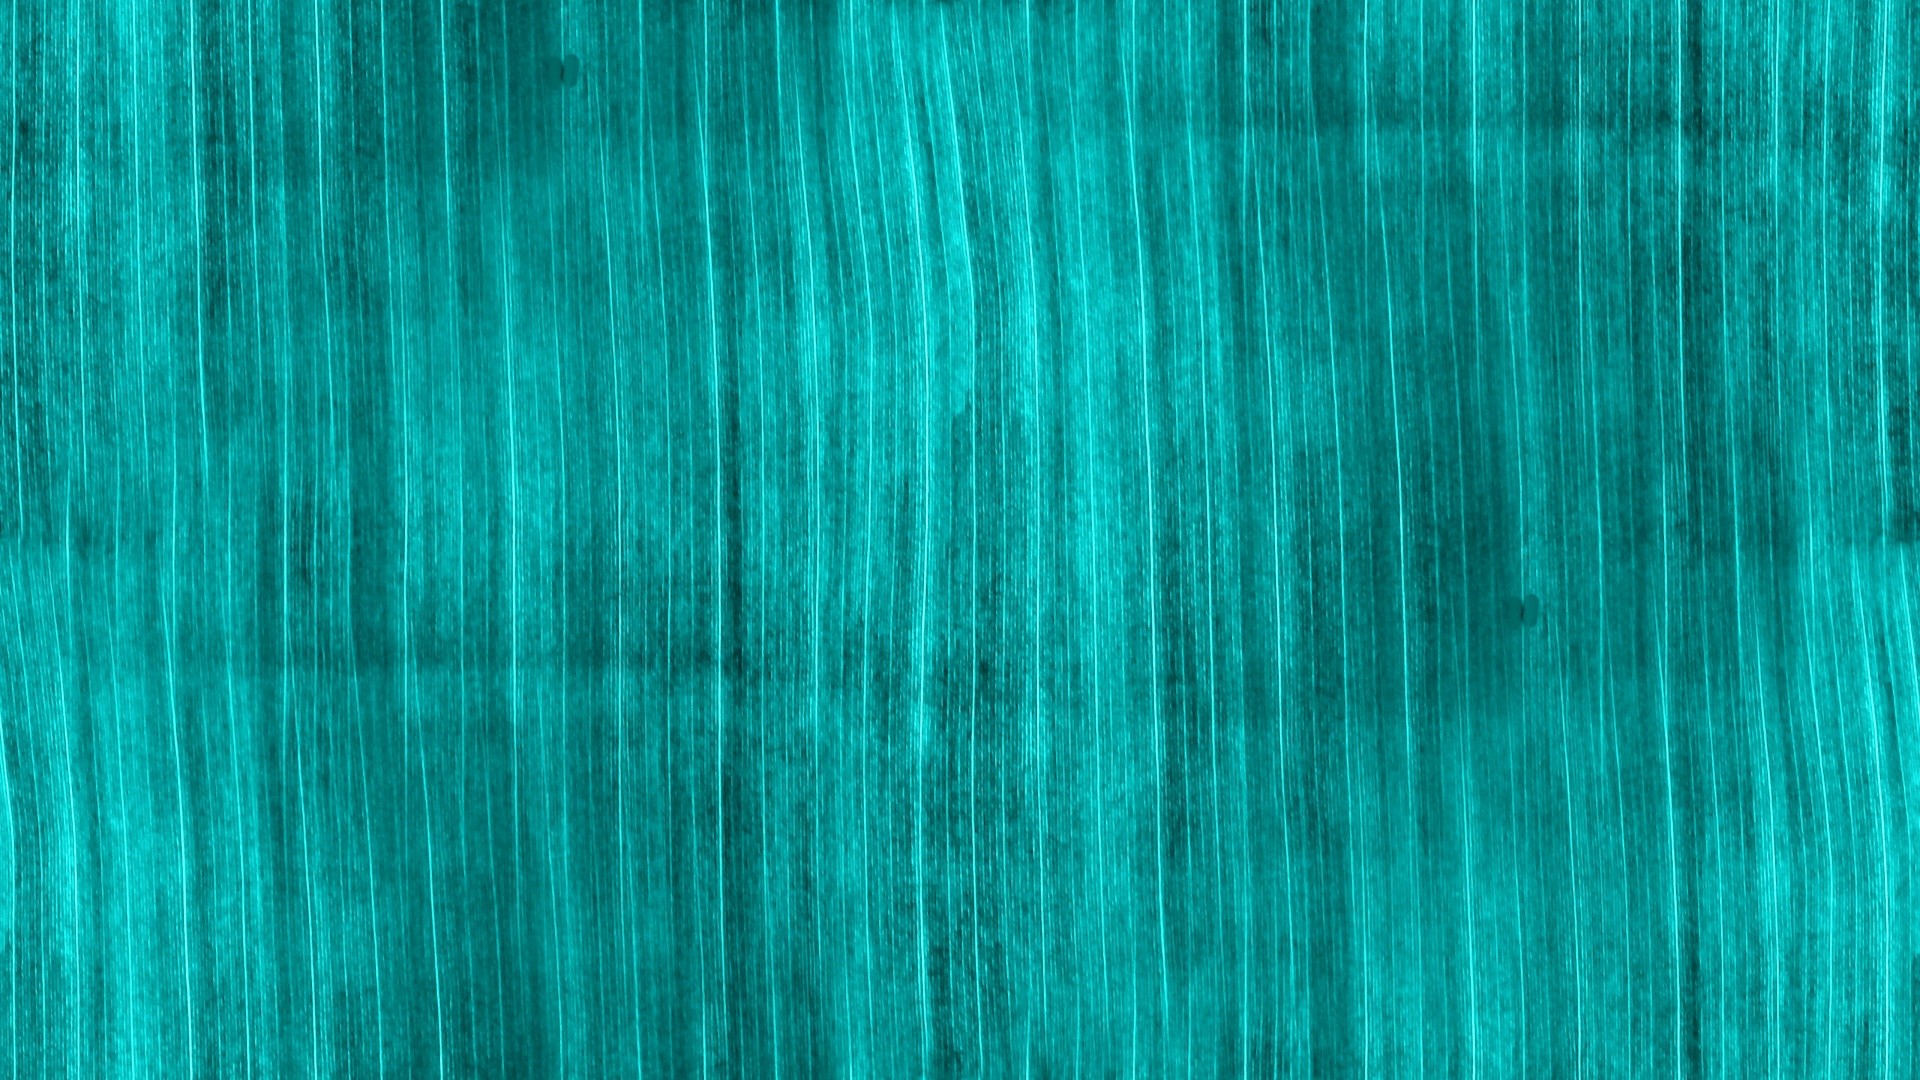 1920x1080 Turquoise Seamless Background